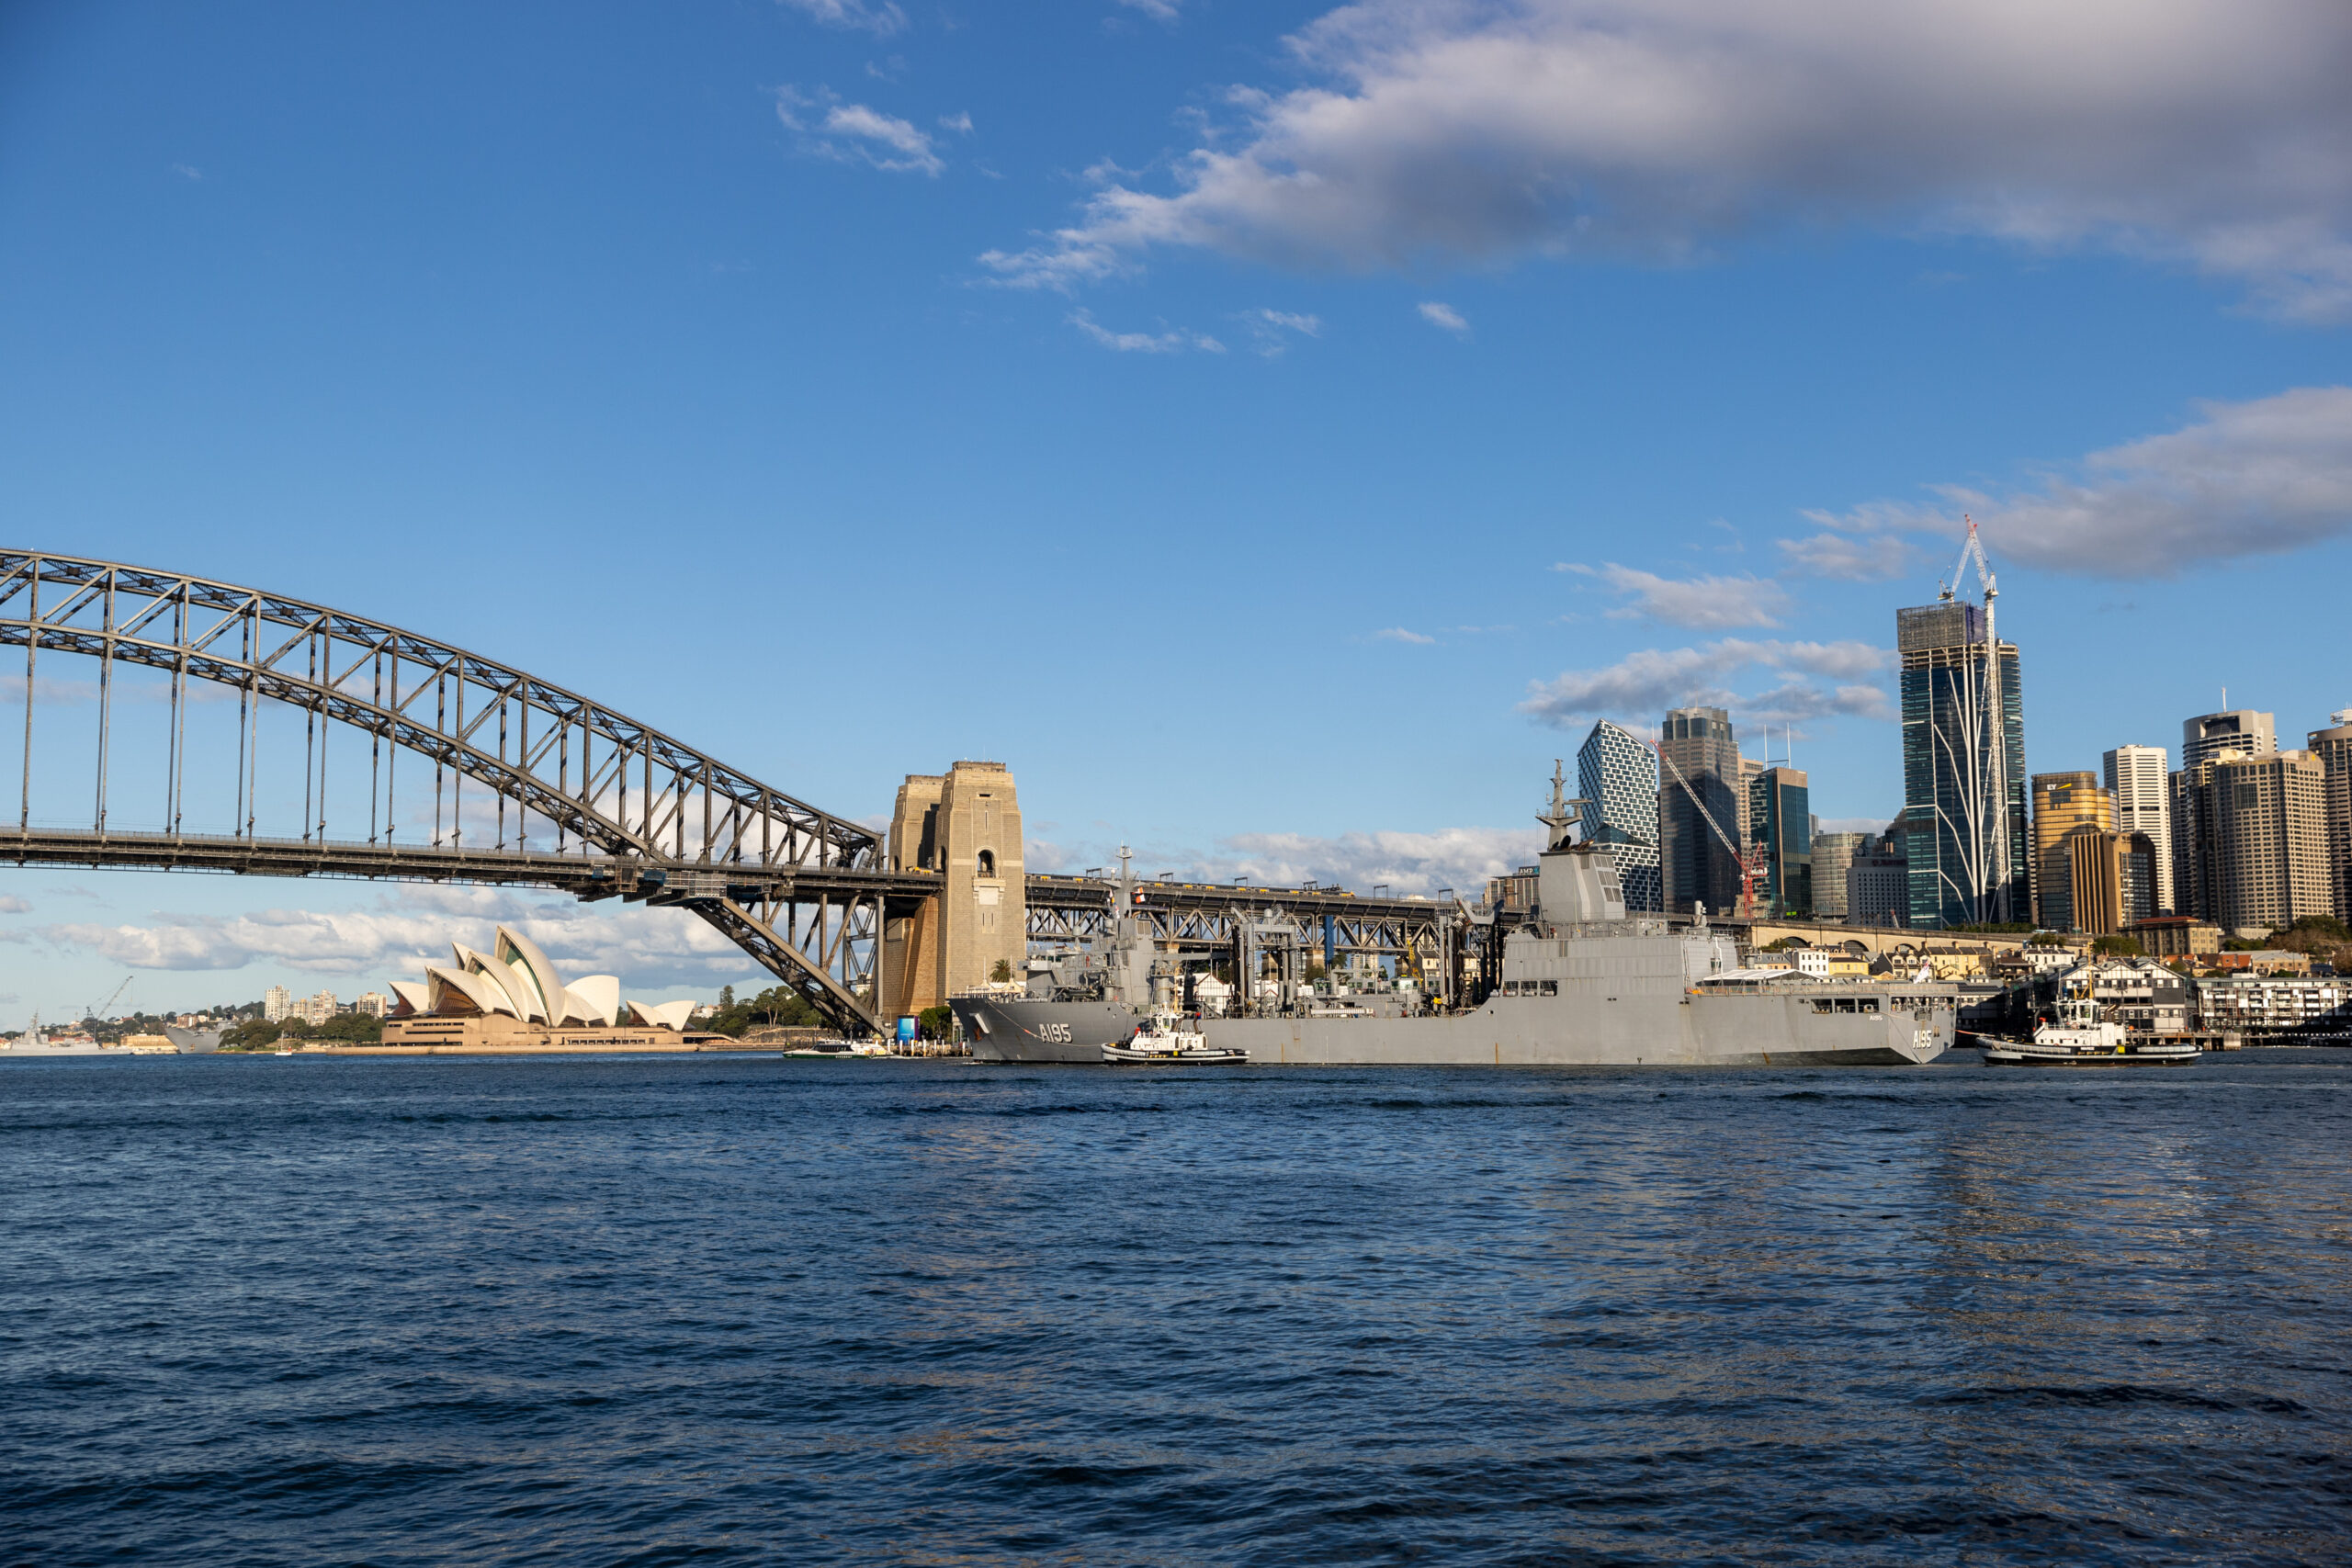 Royal Australian Navy replenishment ship HMAS Supply sails through Sydney Harbour after taking on fuel from the commercial fuel depot at Gore Cove. *** Local Caption *** Royal Australian Navy replenishment ship HMAS Supply completed another first since commissioning after passing under Sydney Harbour Bridge on Wednesday, 18 May 2022. HMAS Supply took on fuel from the commercial fuel depot at Gore Cove on the western side of Sydney Harbour Bridge ahead of departing Fleet Base East as part of a regional presence deployment en route to Exercise Rim of the Pacific (RIMPAC) in Hawaii. This was another first for the Supply-class oiler replenishment ships -- HMAS Supply and HMAS Stalwart -- as they continue to expand their operating capability. HMAS Supply was commissioned on 10 April 2021 and the second ship, HMAS Stalwart, was commissioned seven months later on 13 November 2021. The double-hulled ships carry fuel, dry cargo, water, food, ammunition, equipment and spare parts to provide operational support for deployed Navy ships and to support Australian Defence Force operations far from the port. HMAS Supply has already provided vital support to Operation Tonga Assist 2022.